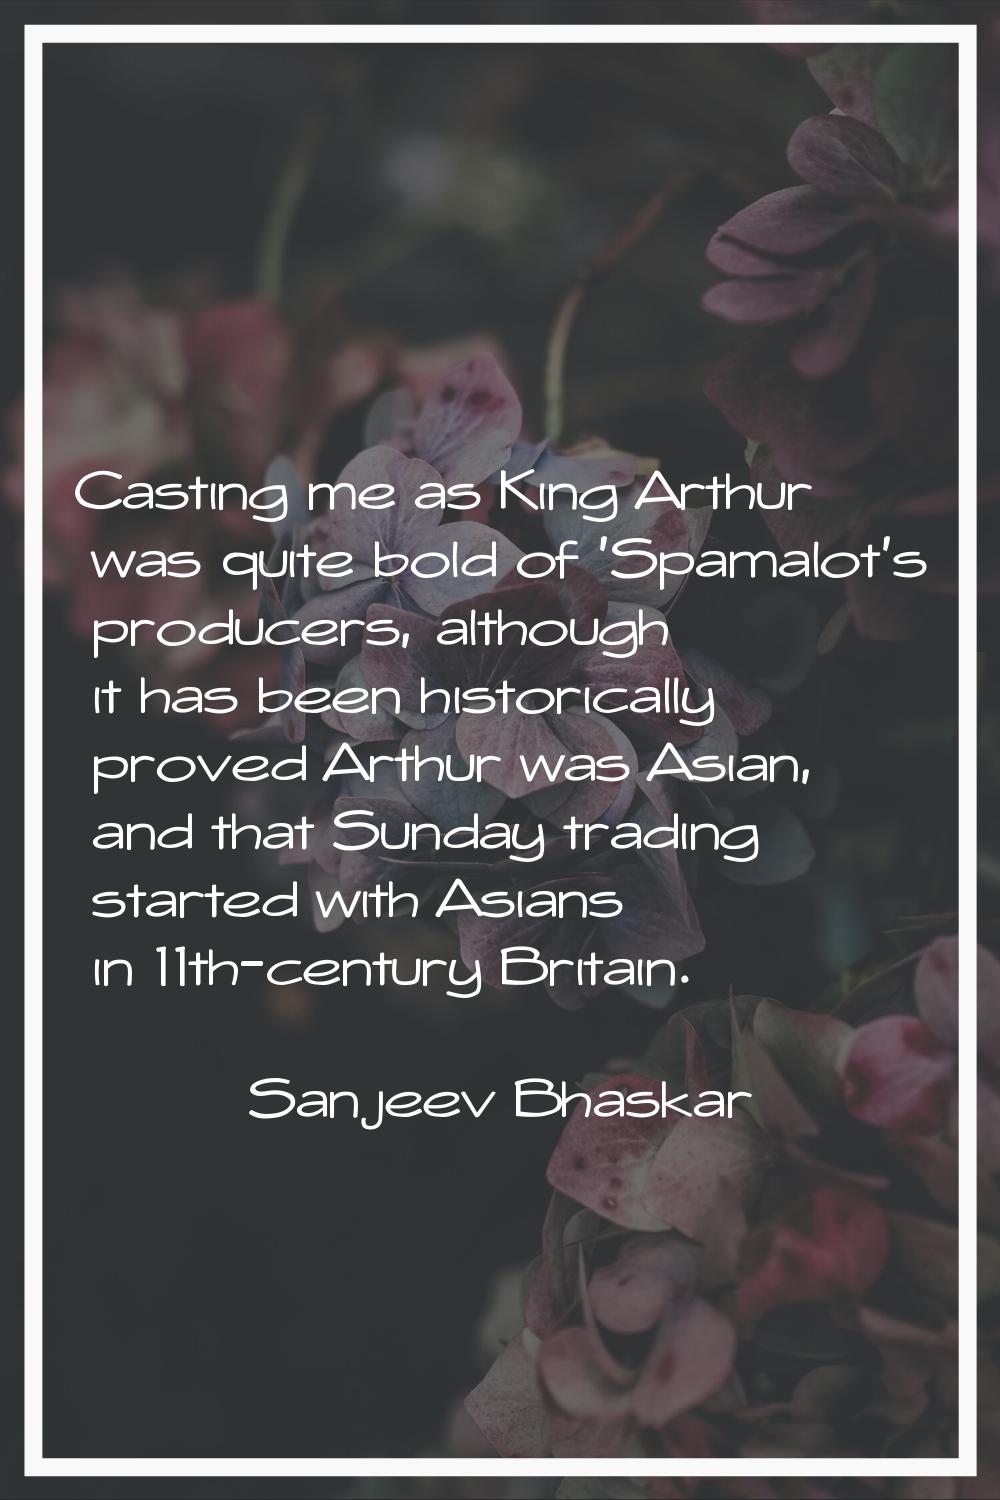 Casting me as King Arthur was quite bold of 'Spamalot's producers, although it has been historicall